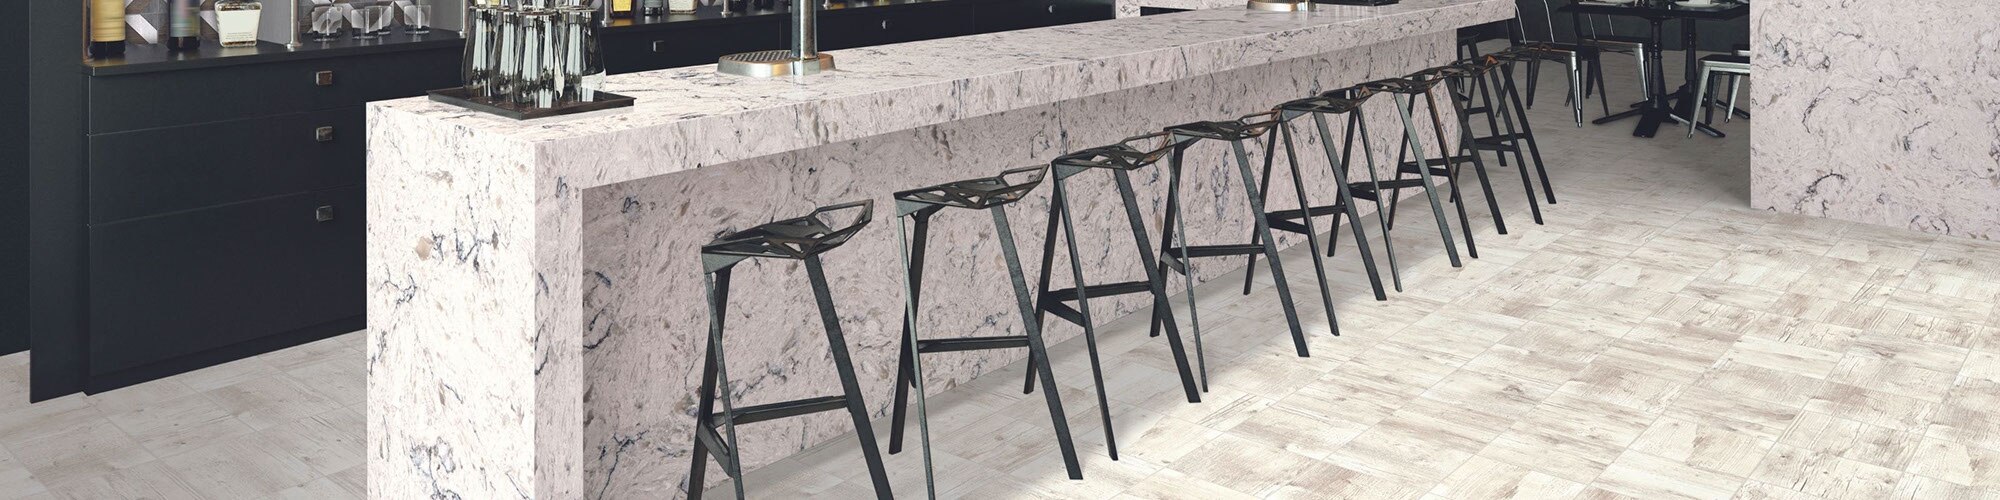 Hotel bar with floor tiling that looks like whitewashed wood, bar top of white quartz with black veining with a row of black bar stools.